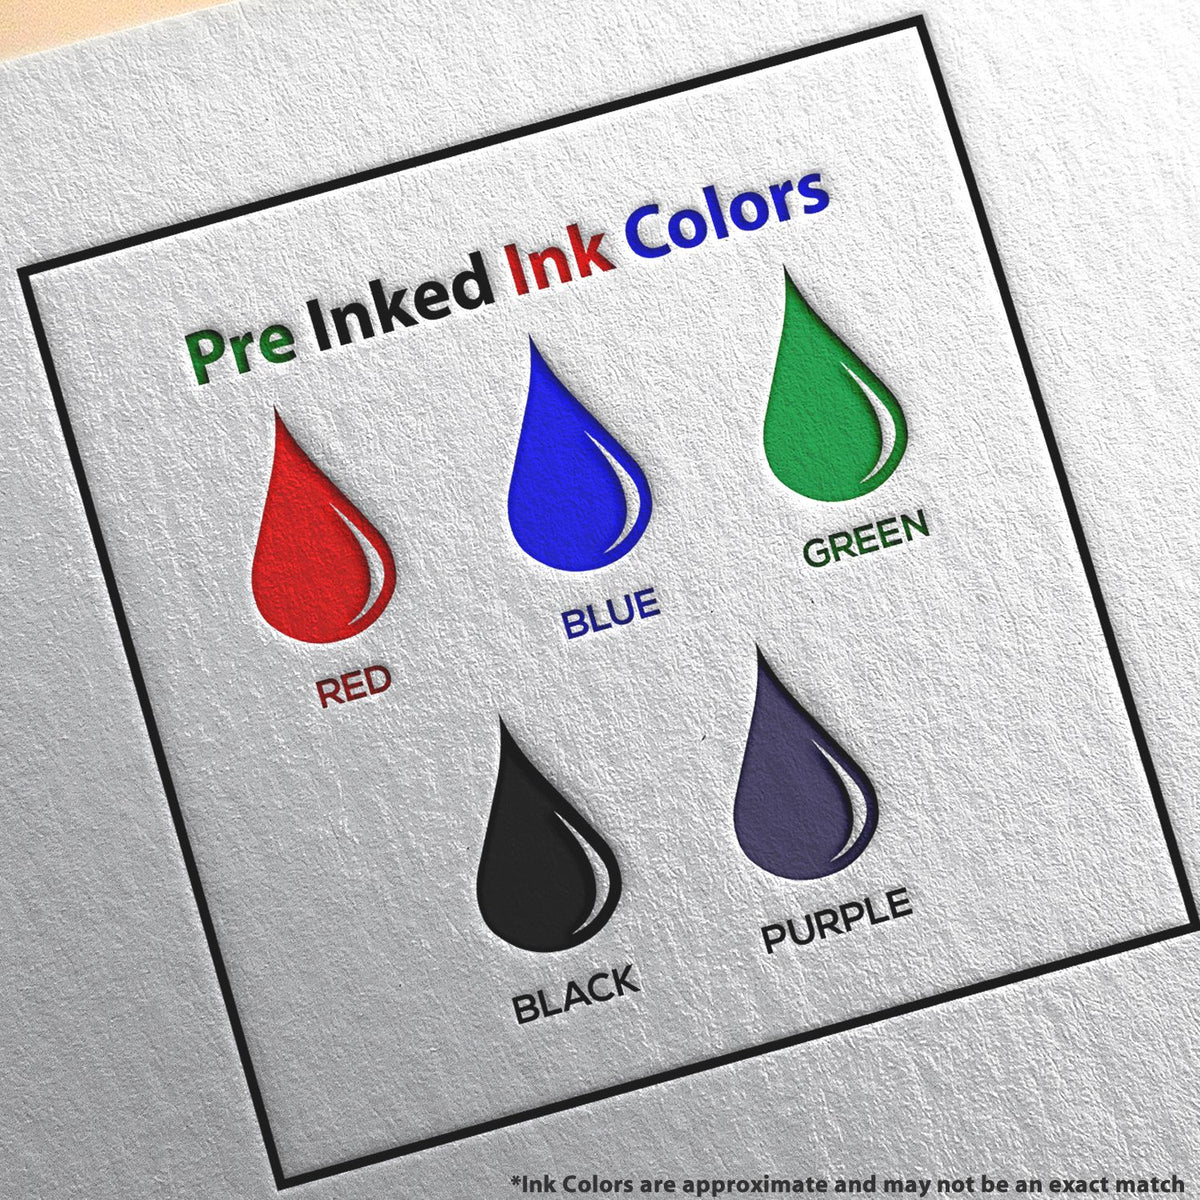 A picture showing the different ink colors or hues available for the Premium MaxLight Pre-Inked Iowa Landscape Architectural Stamp product.